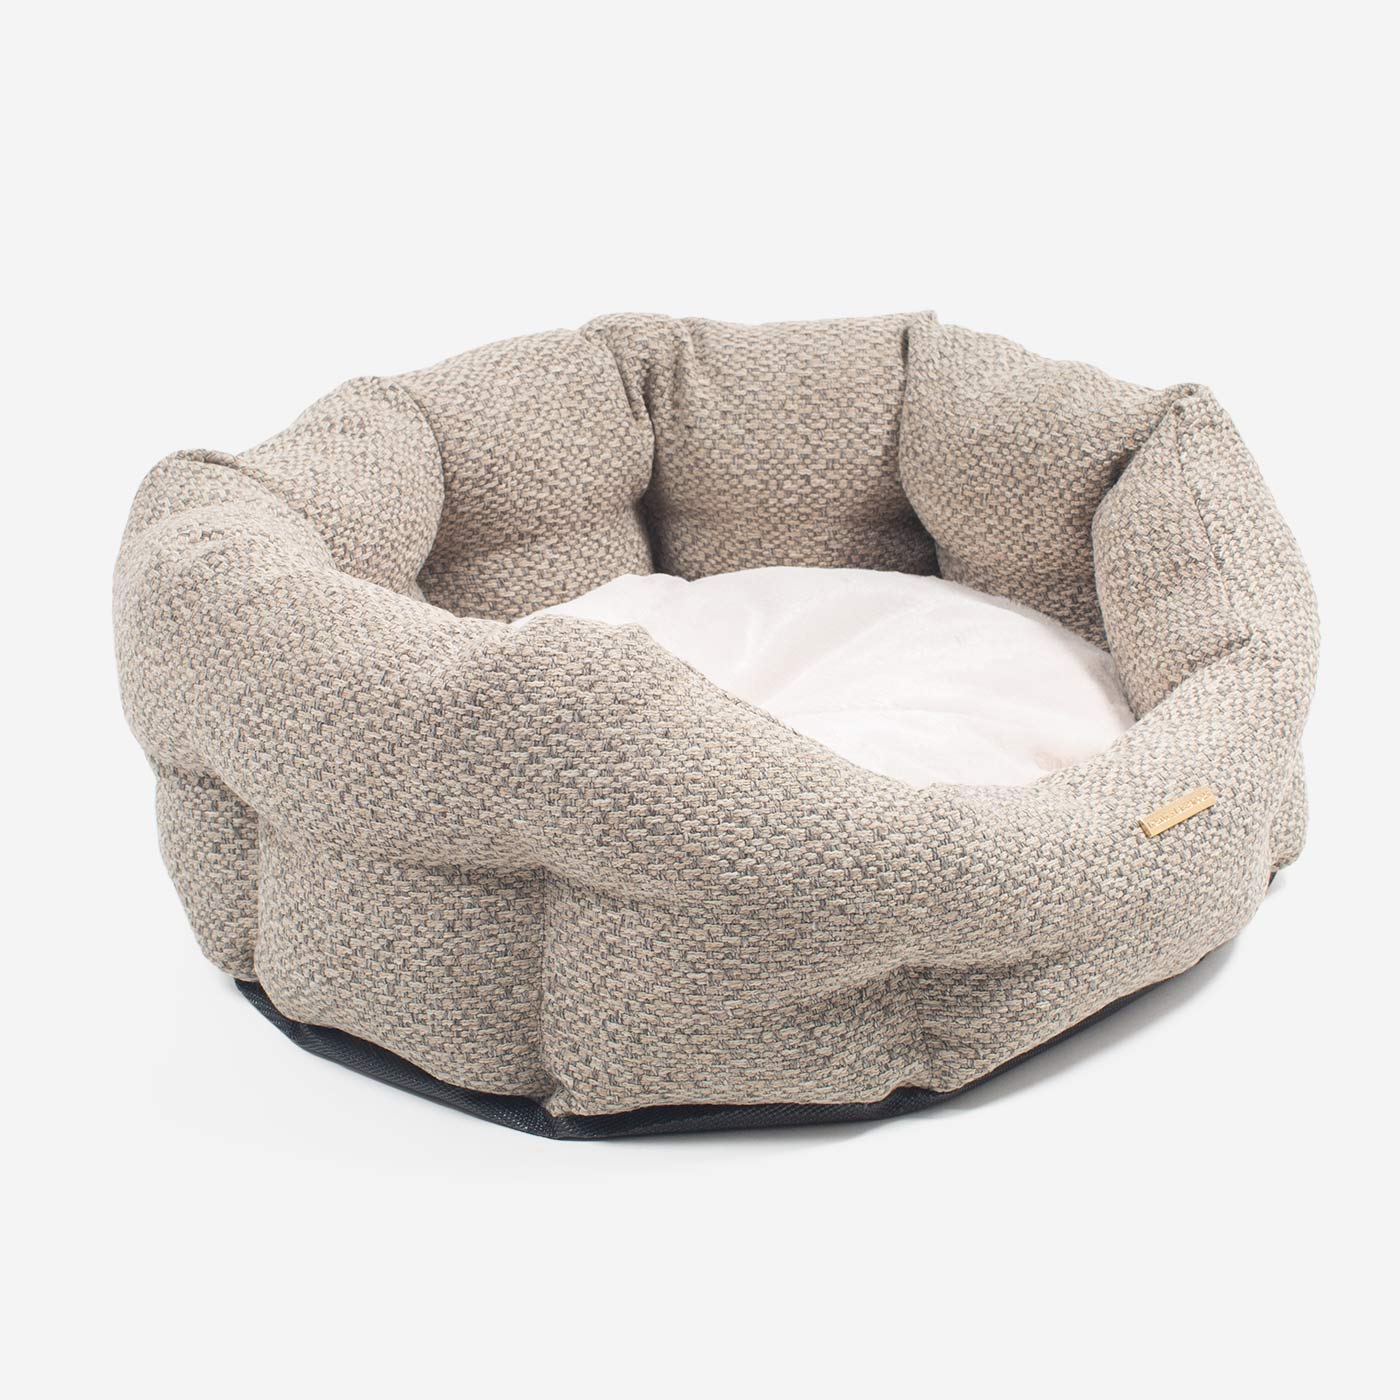 Discover our luxury Herdwick oval dog bed in beautiful pebble, the ideal choice for dogs to enjoy blissful nap-time, featuring reversible inner cushion with raised sides for dogs who love to rest their head for the ultimate cosiness! Handcrafted in Italy for pure pet luxury! Available now at Lords & Labradors 